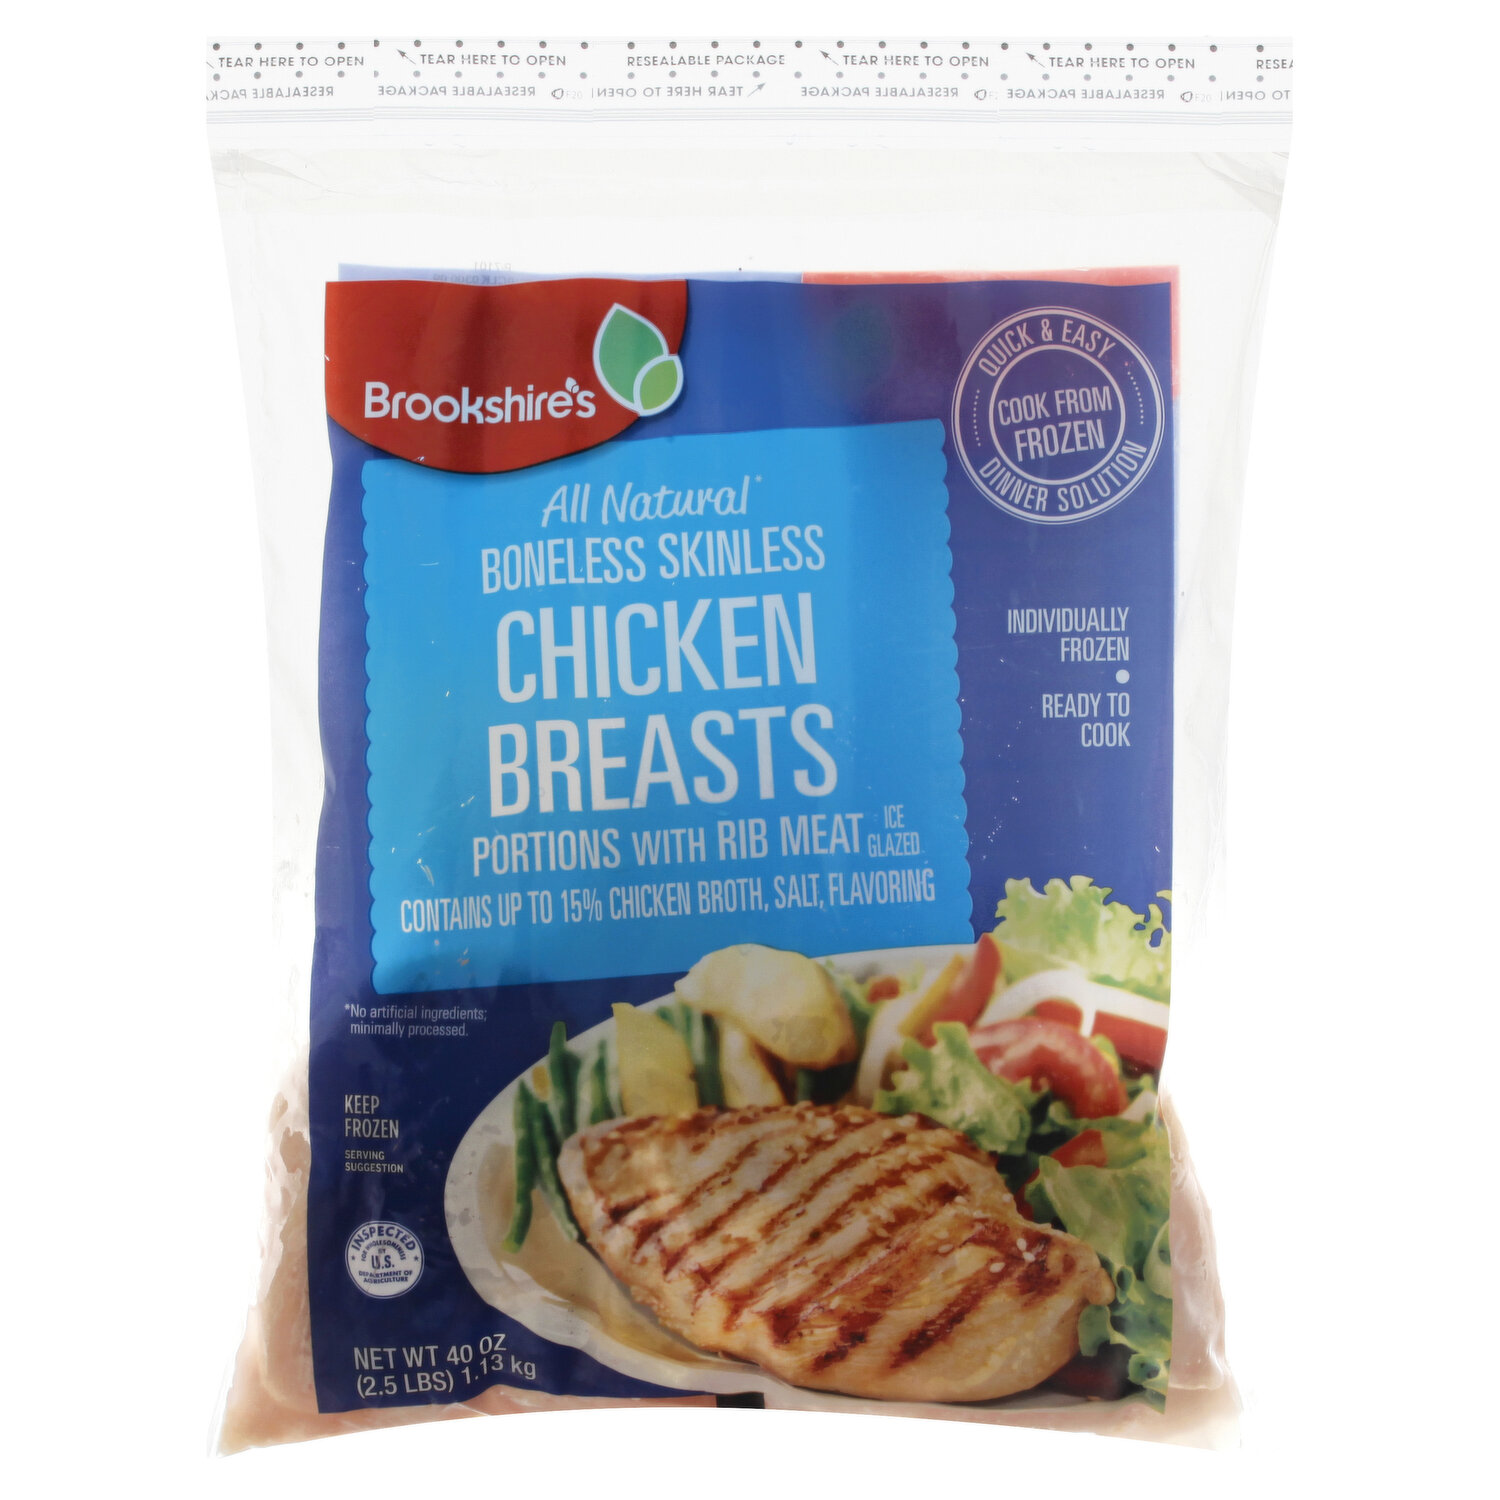 Just Bare raw chicken breast pieces. New to me. Suggestions and experience  requested please! Frozen and cost $11.69 for the bag. Scottsdale AZ :  r/Costco